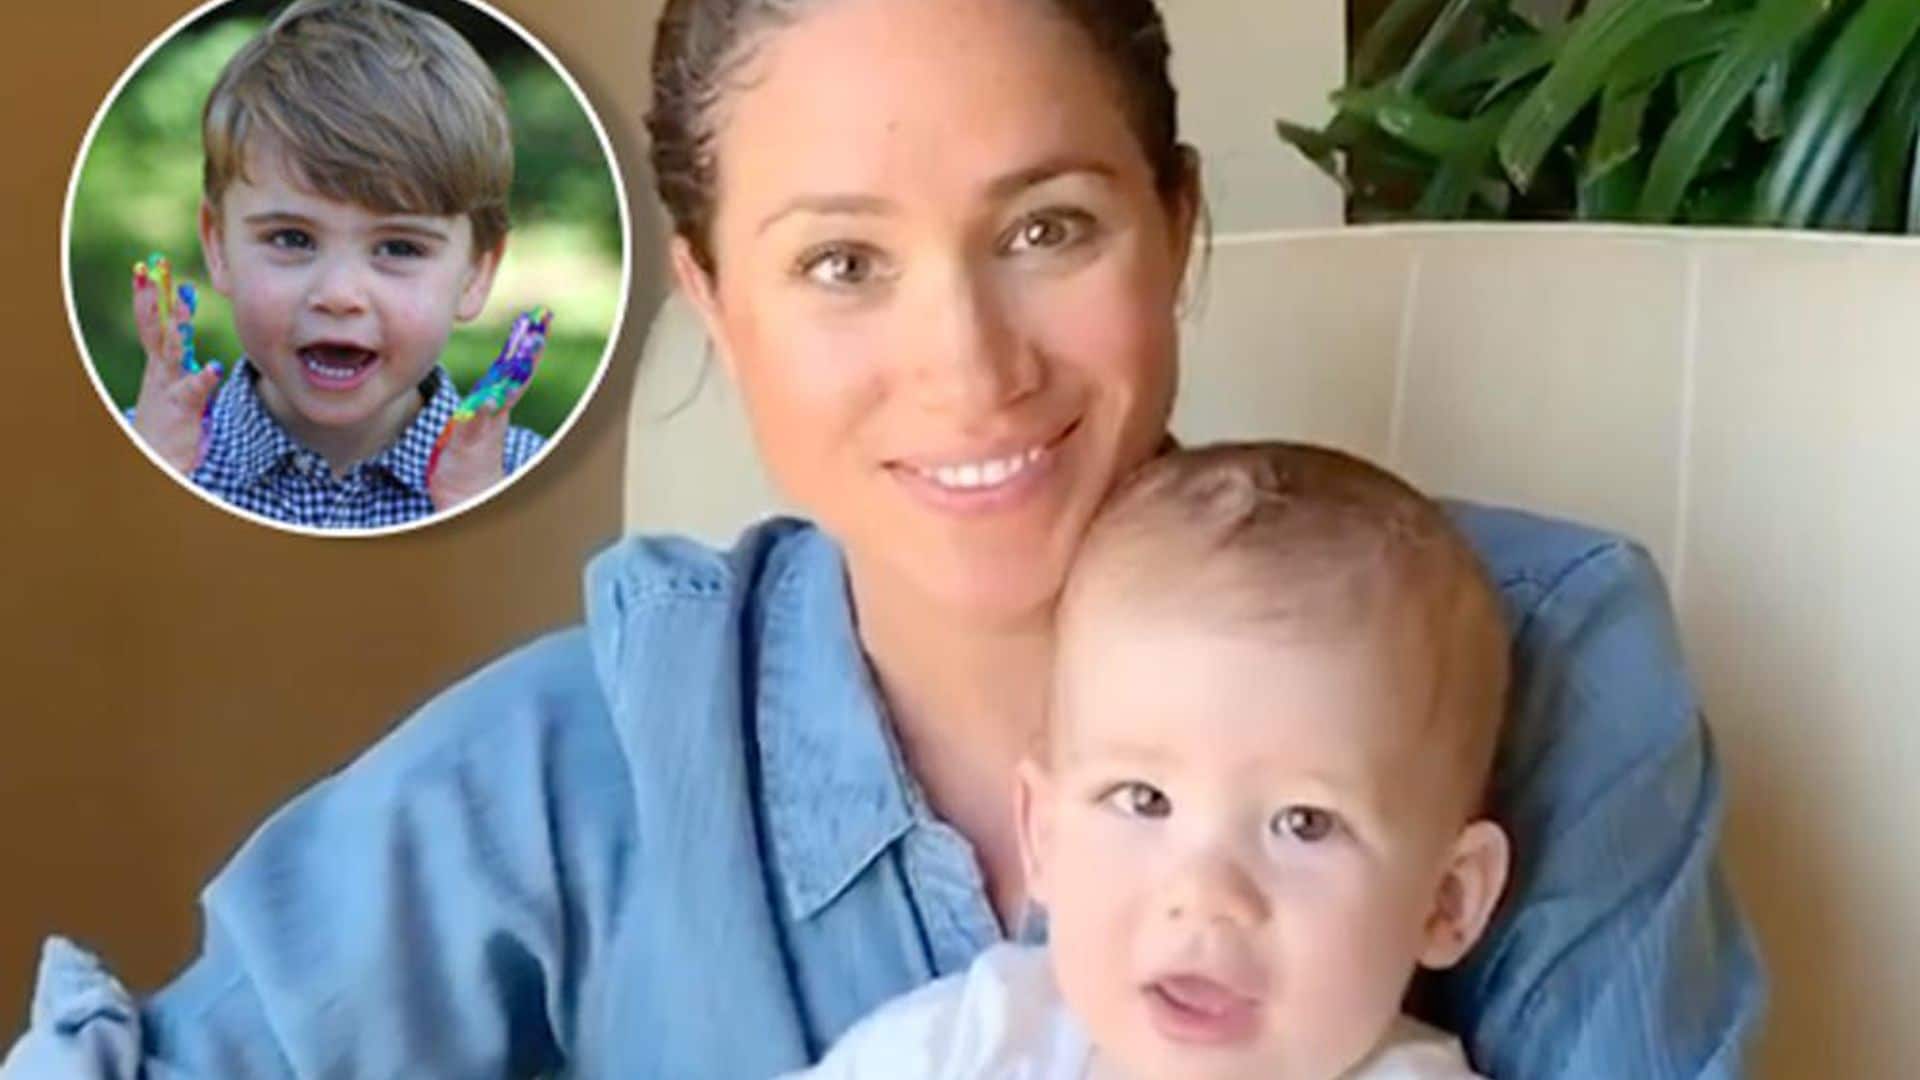 Meghan Markle's son Archie is just as cheeky as cousin Prince Louis